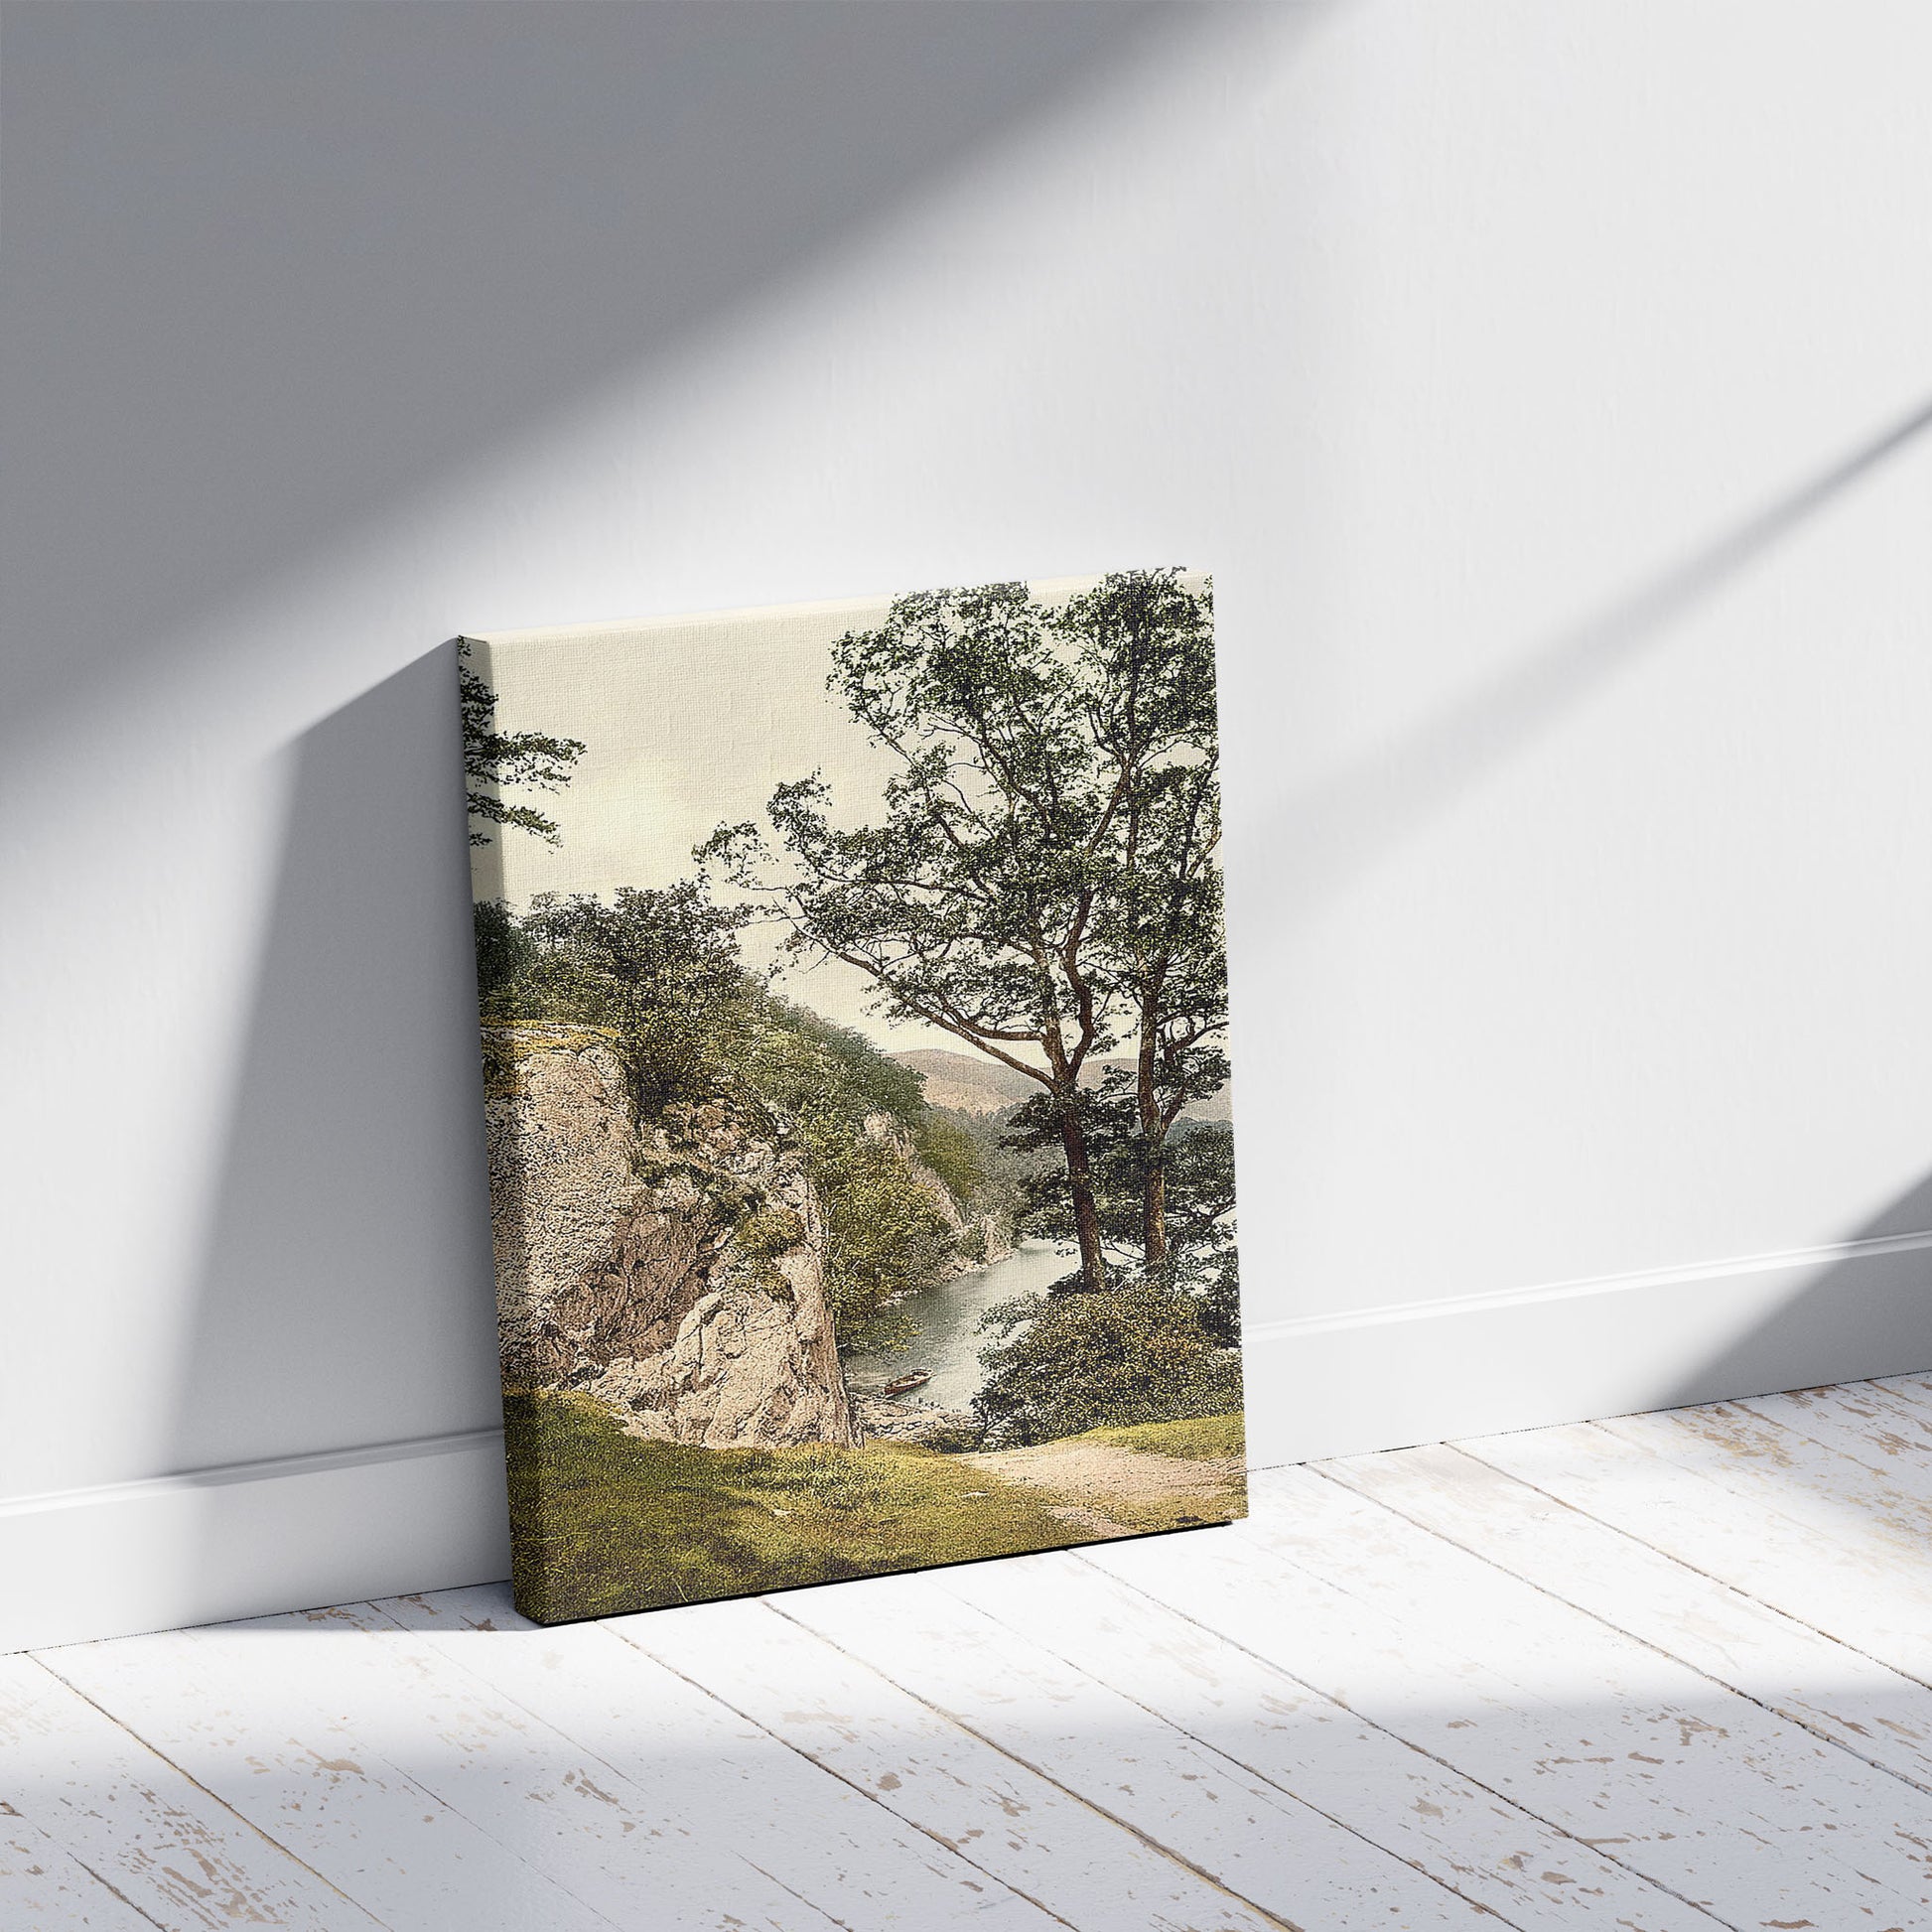 A picture of Ullswater, Stybarrow Crag, Lake District, England, a mockup of the print leaning against a wall